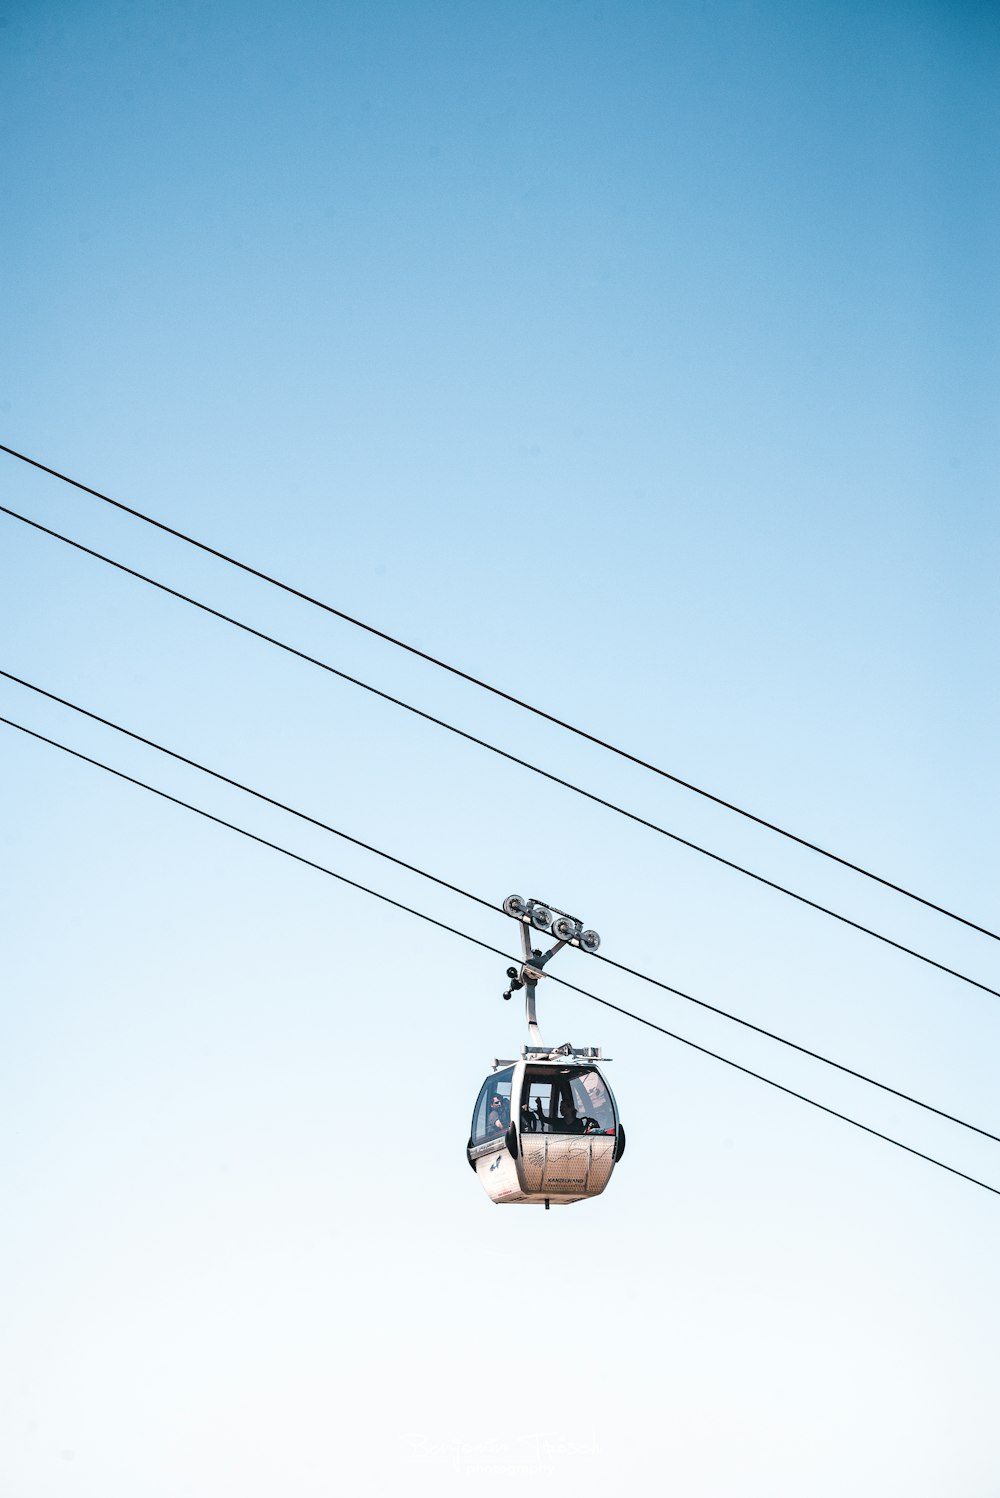 brown cable car under blue sky during daytime